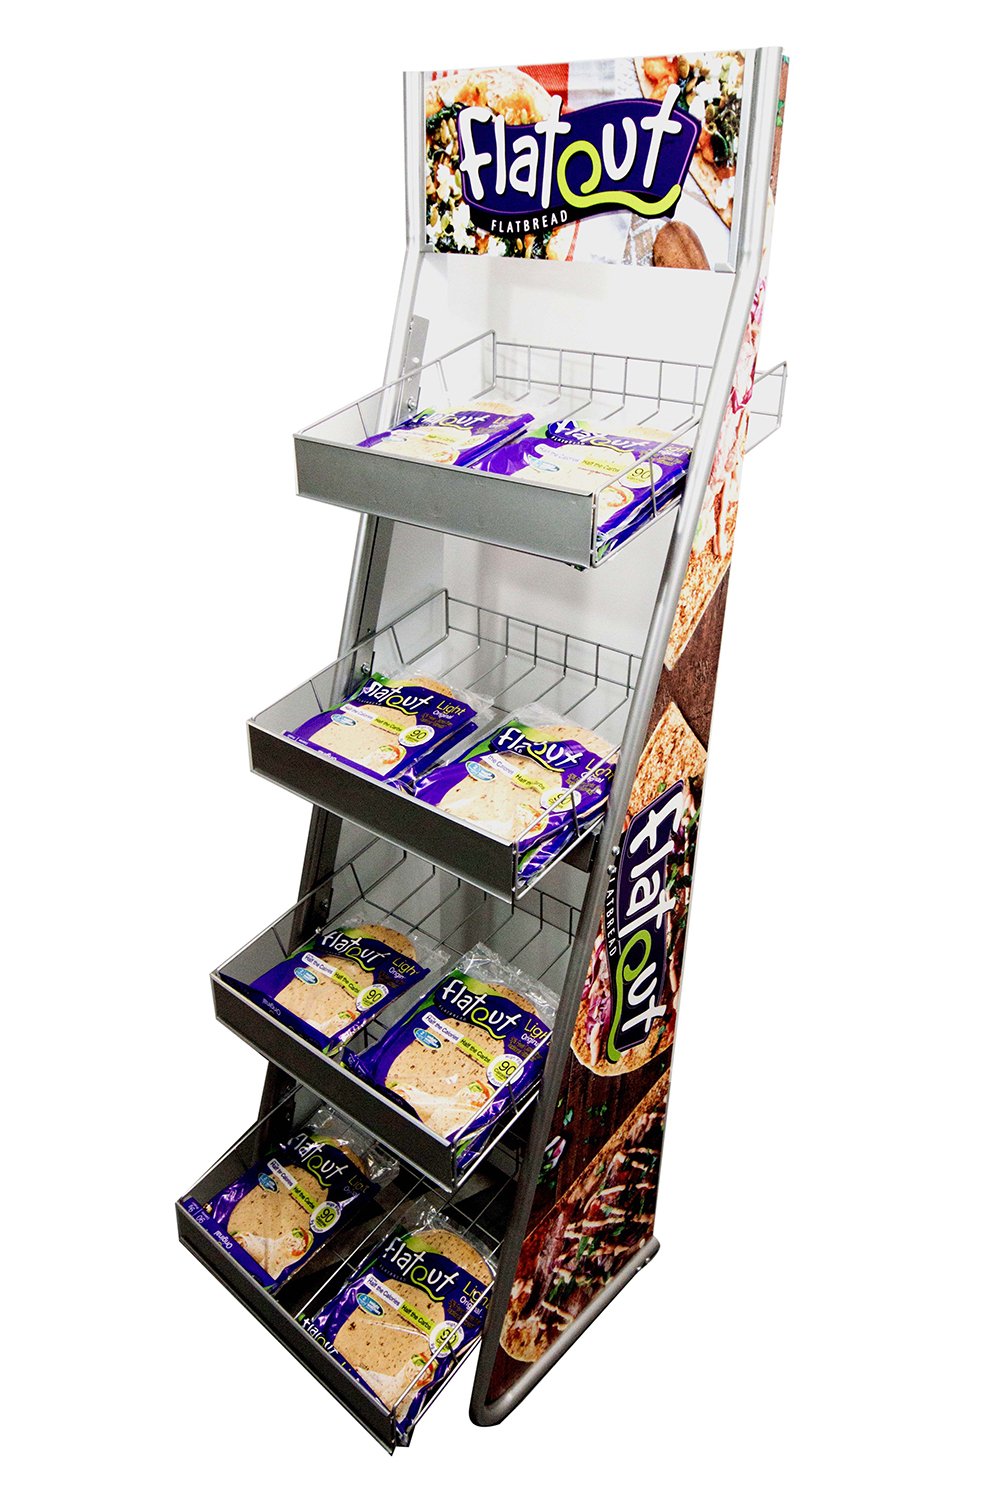 Grocery Flatout Flatbread Stand (1)